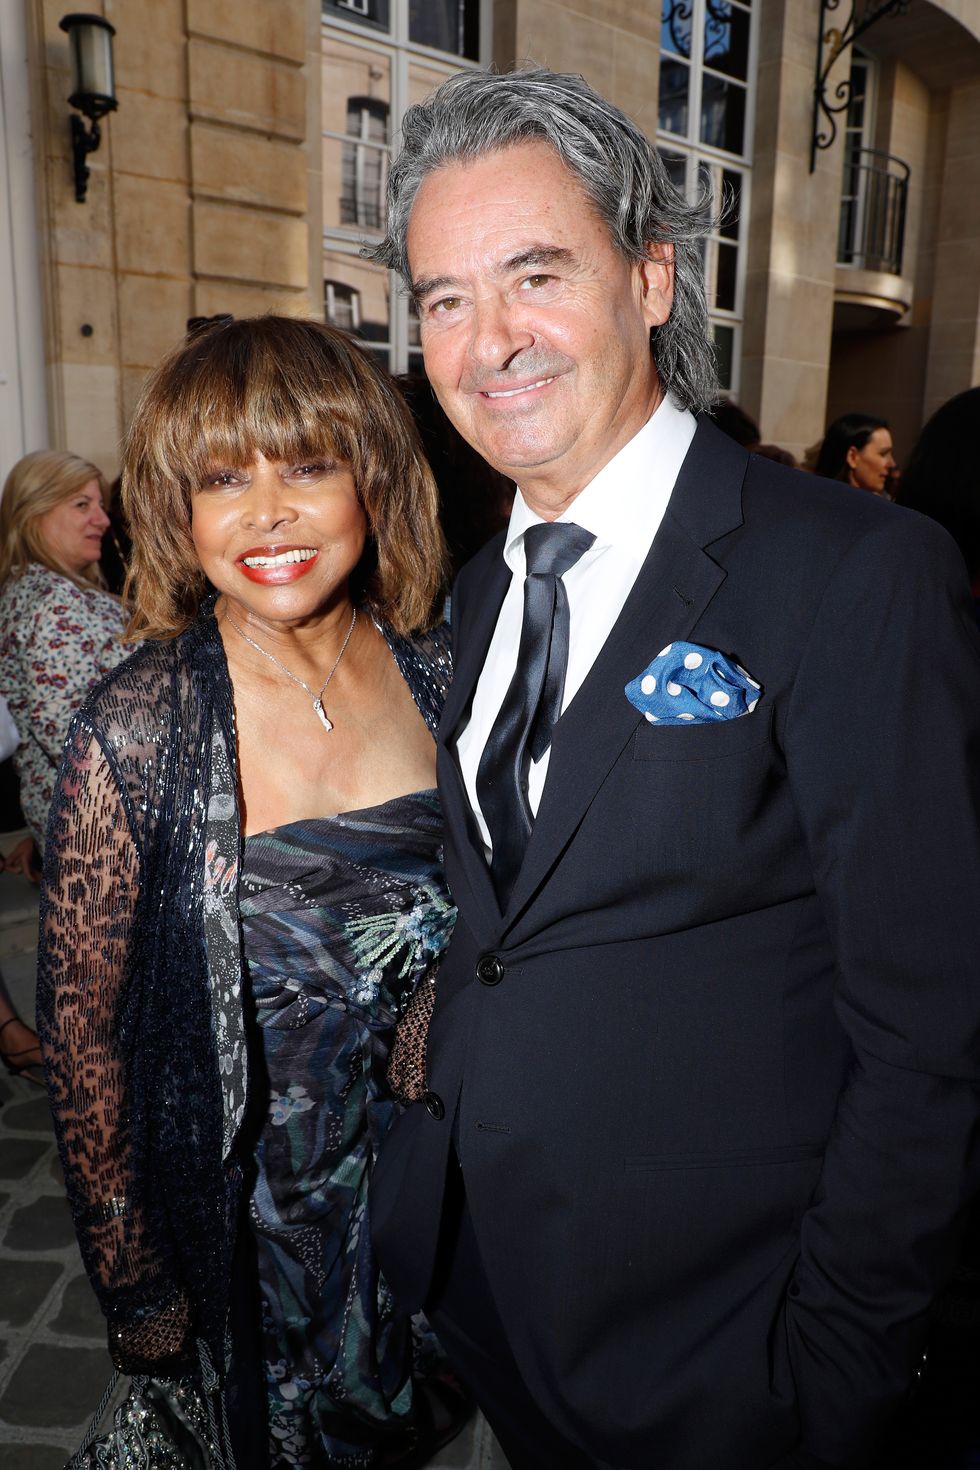 paris, france july 03 singer tina turner and her husband erwin bach attend the giorgio armani prive haute couture fall winter 20182019 show as part of paris fashion week on july 3, 2018 in paris, france photo by bertrand rindoff petroffgetty images